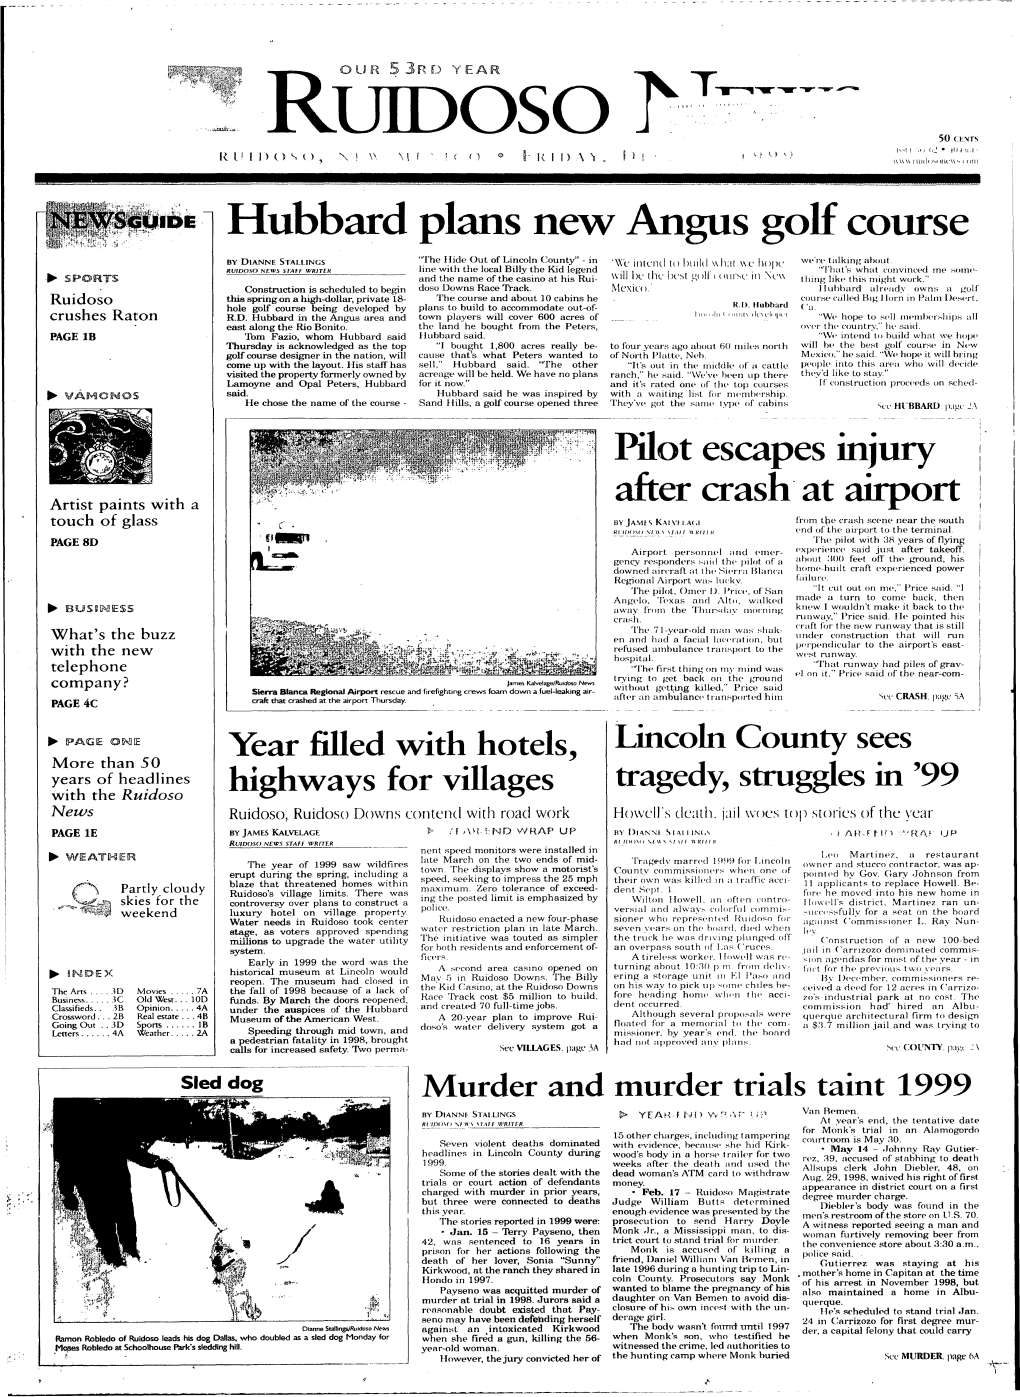 Hubbard Plans New Angus Golf Course